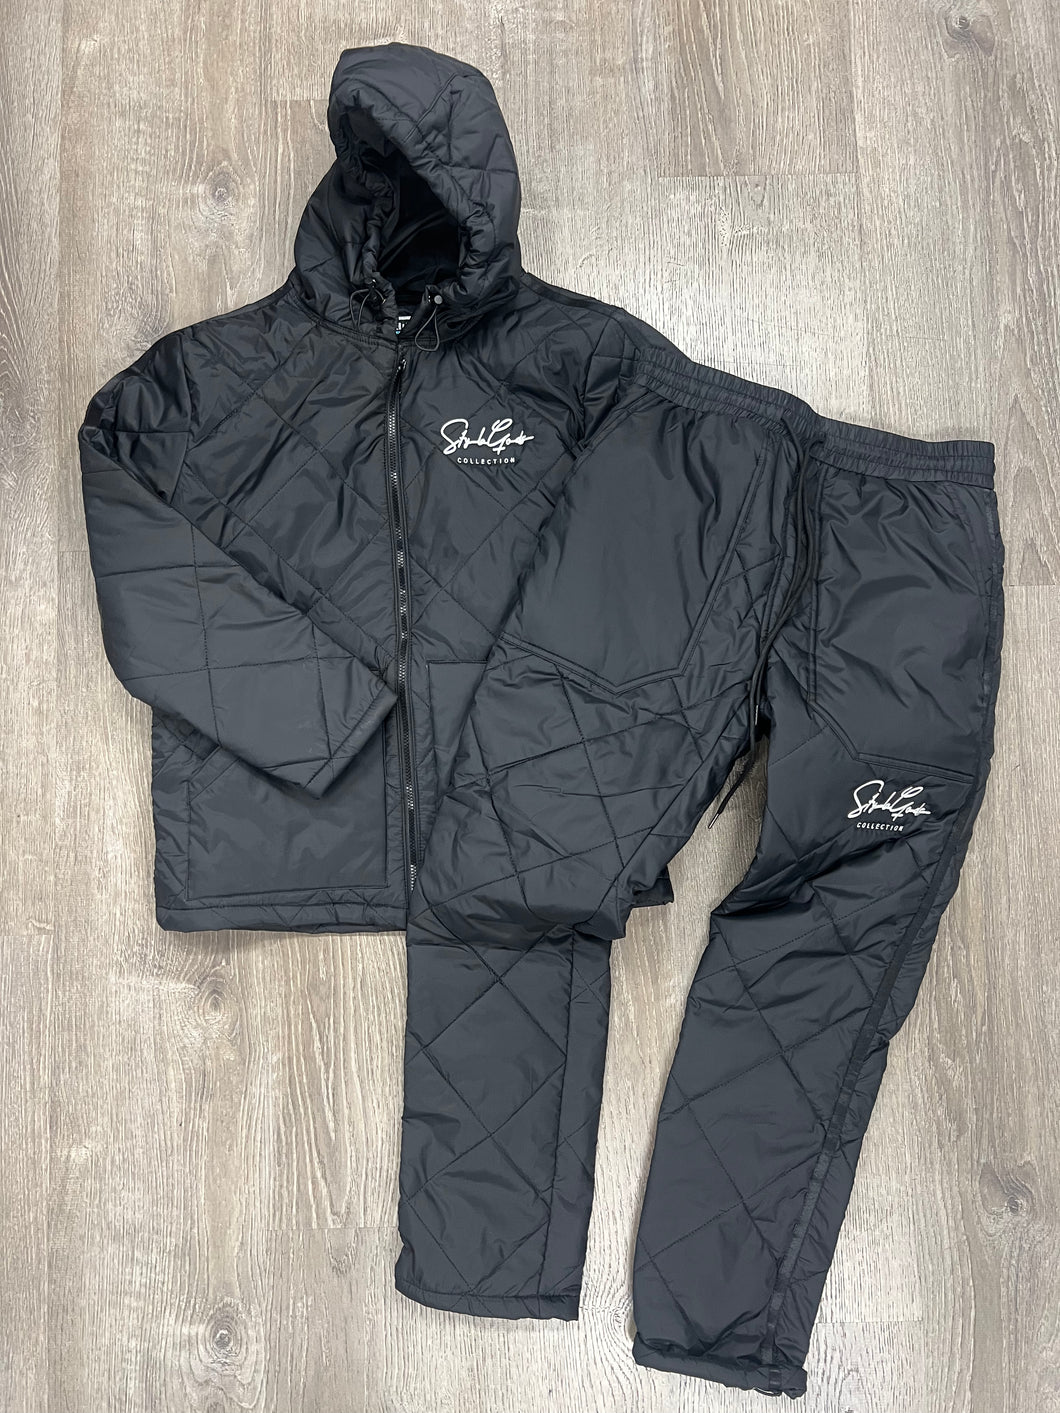 StyleGods Quilted Style Script Zip Up Jogging Suit - Black/White